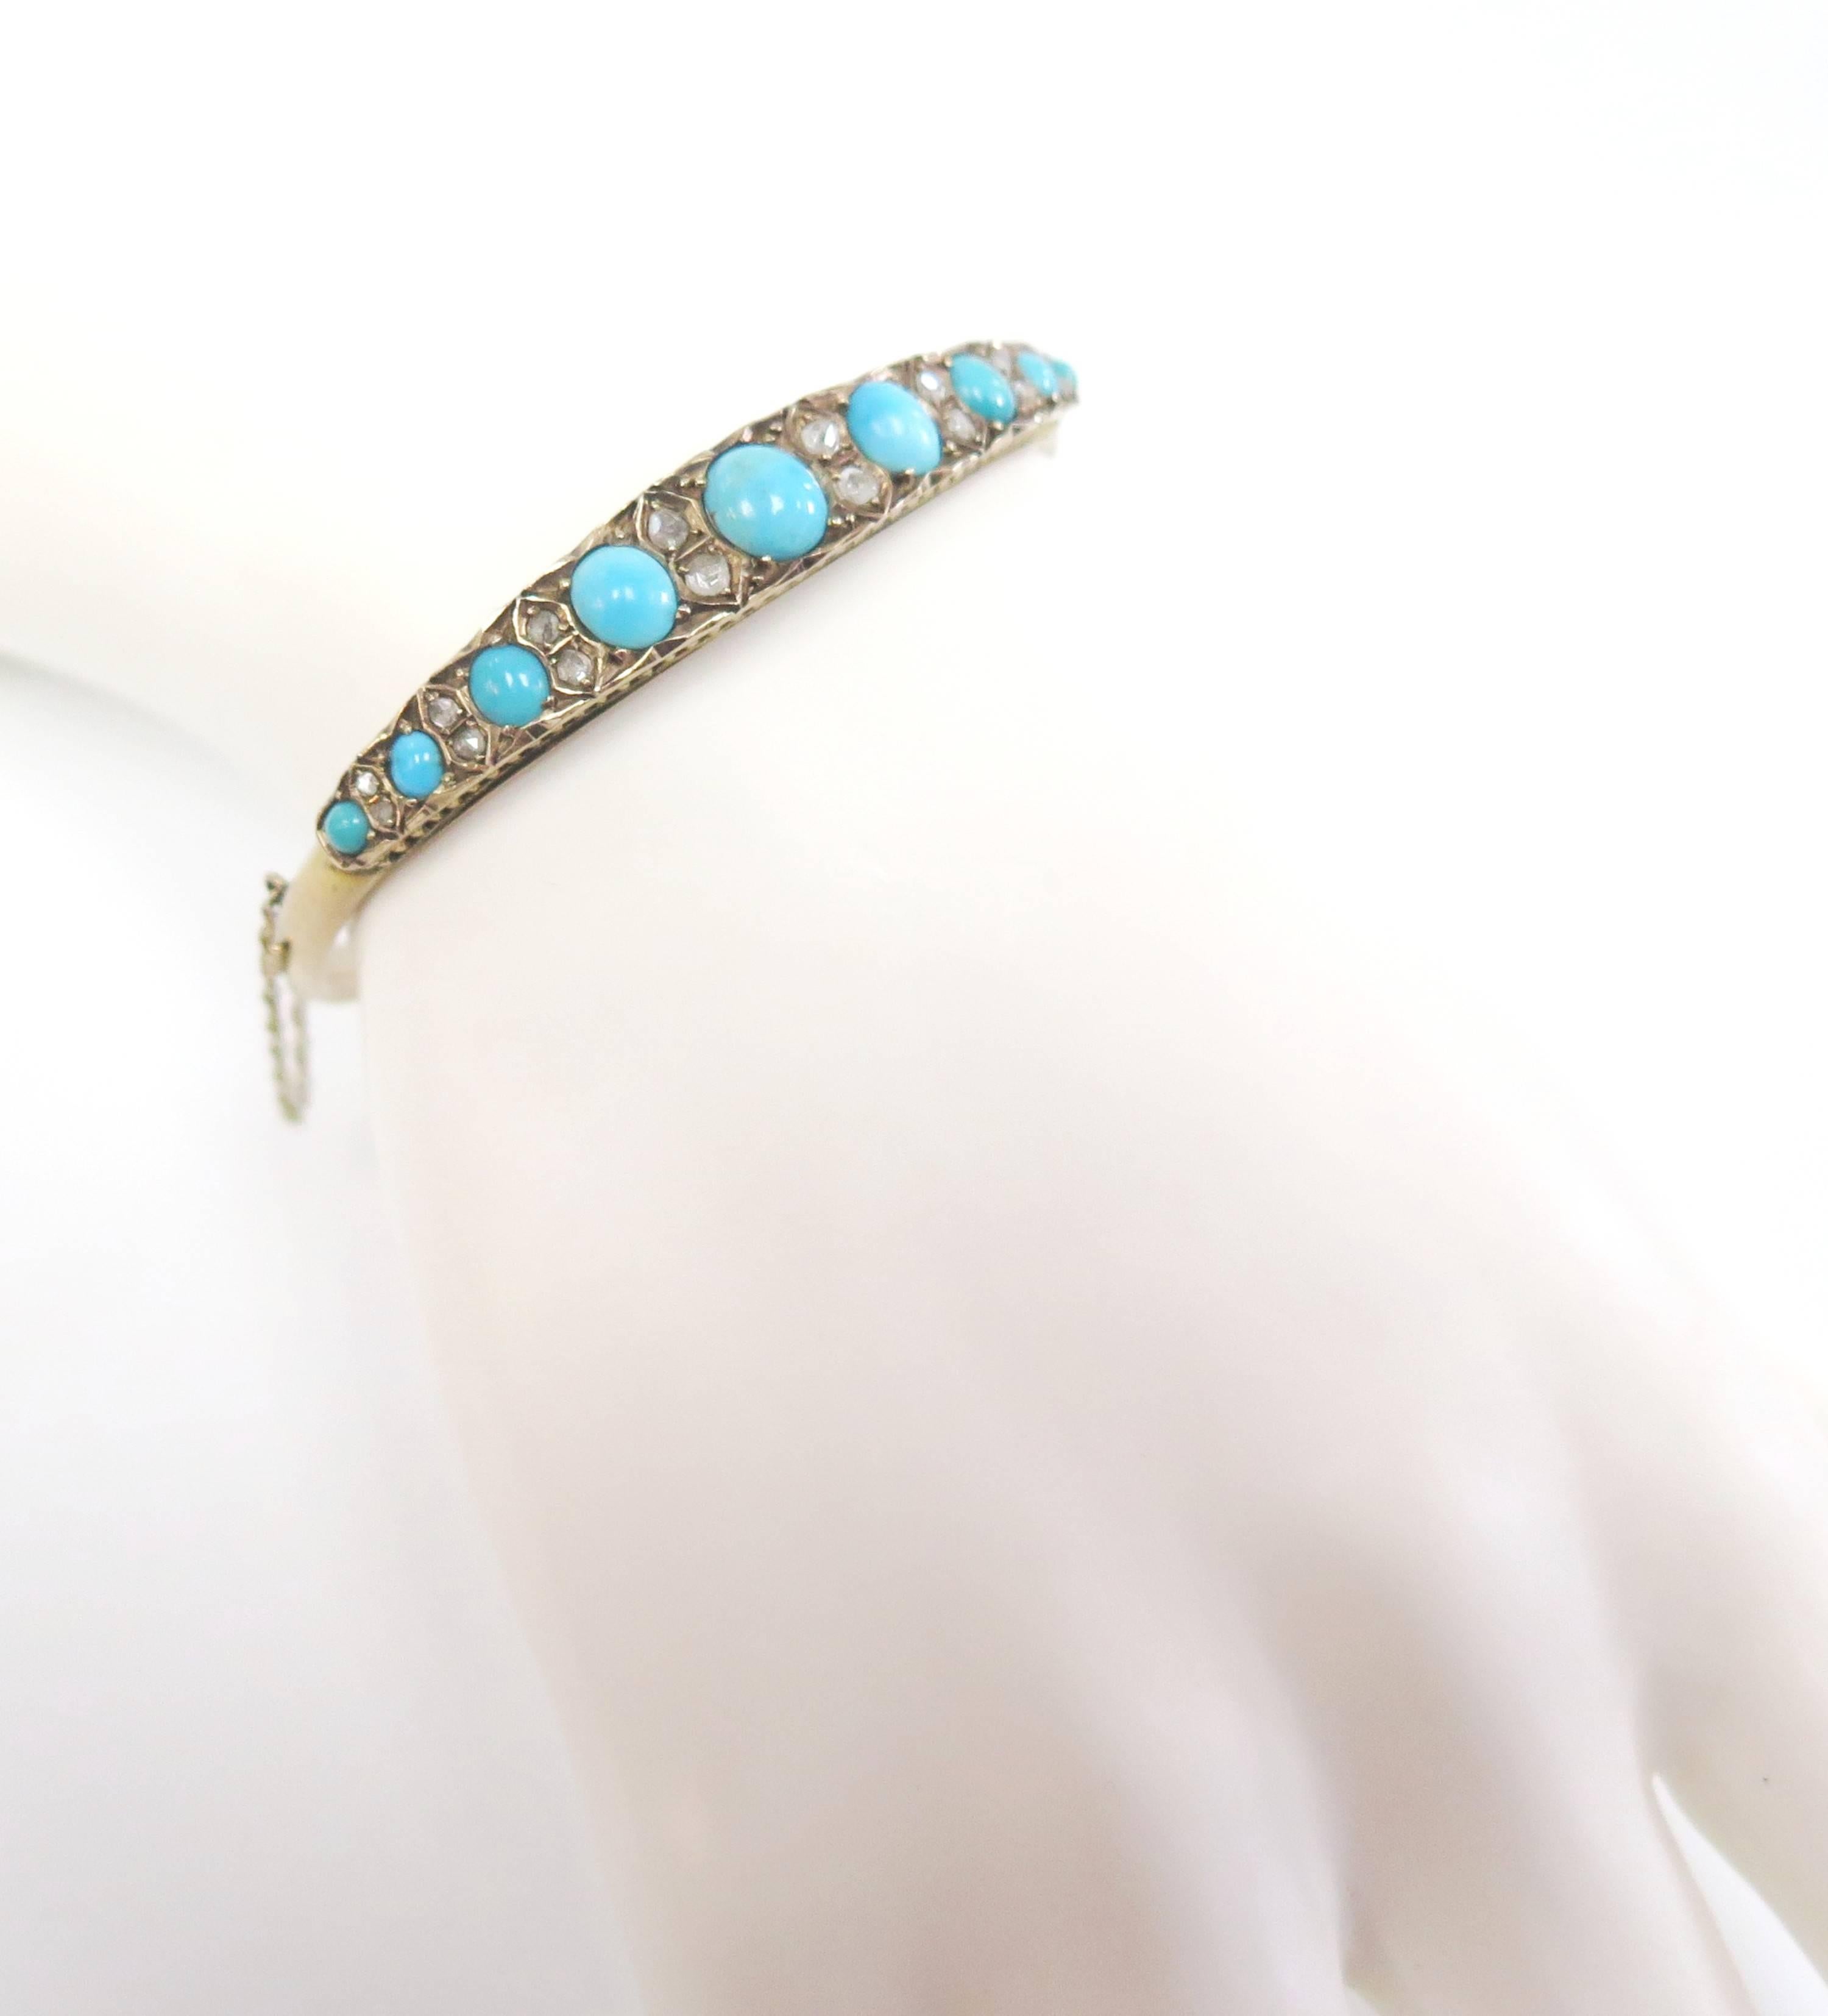 Antique Victorian 1800s Bangle with Turquoise, Rose Cut Diamonds, 14 Karat For Sale 1